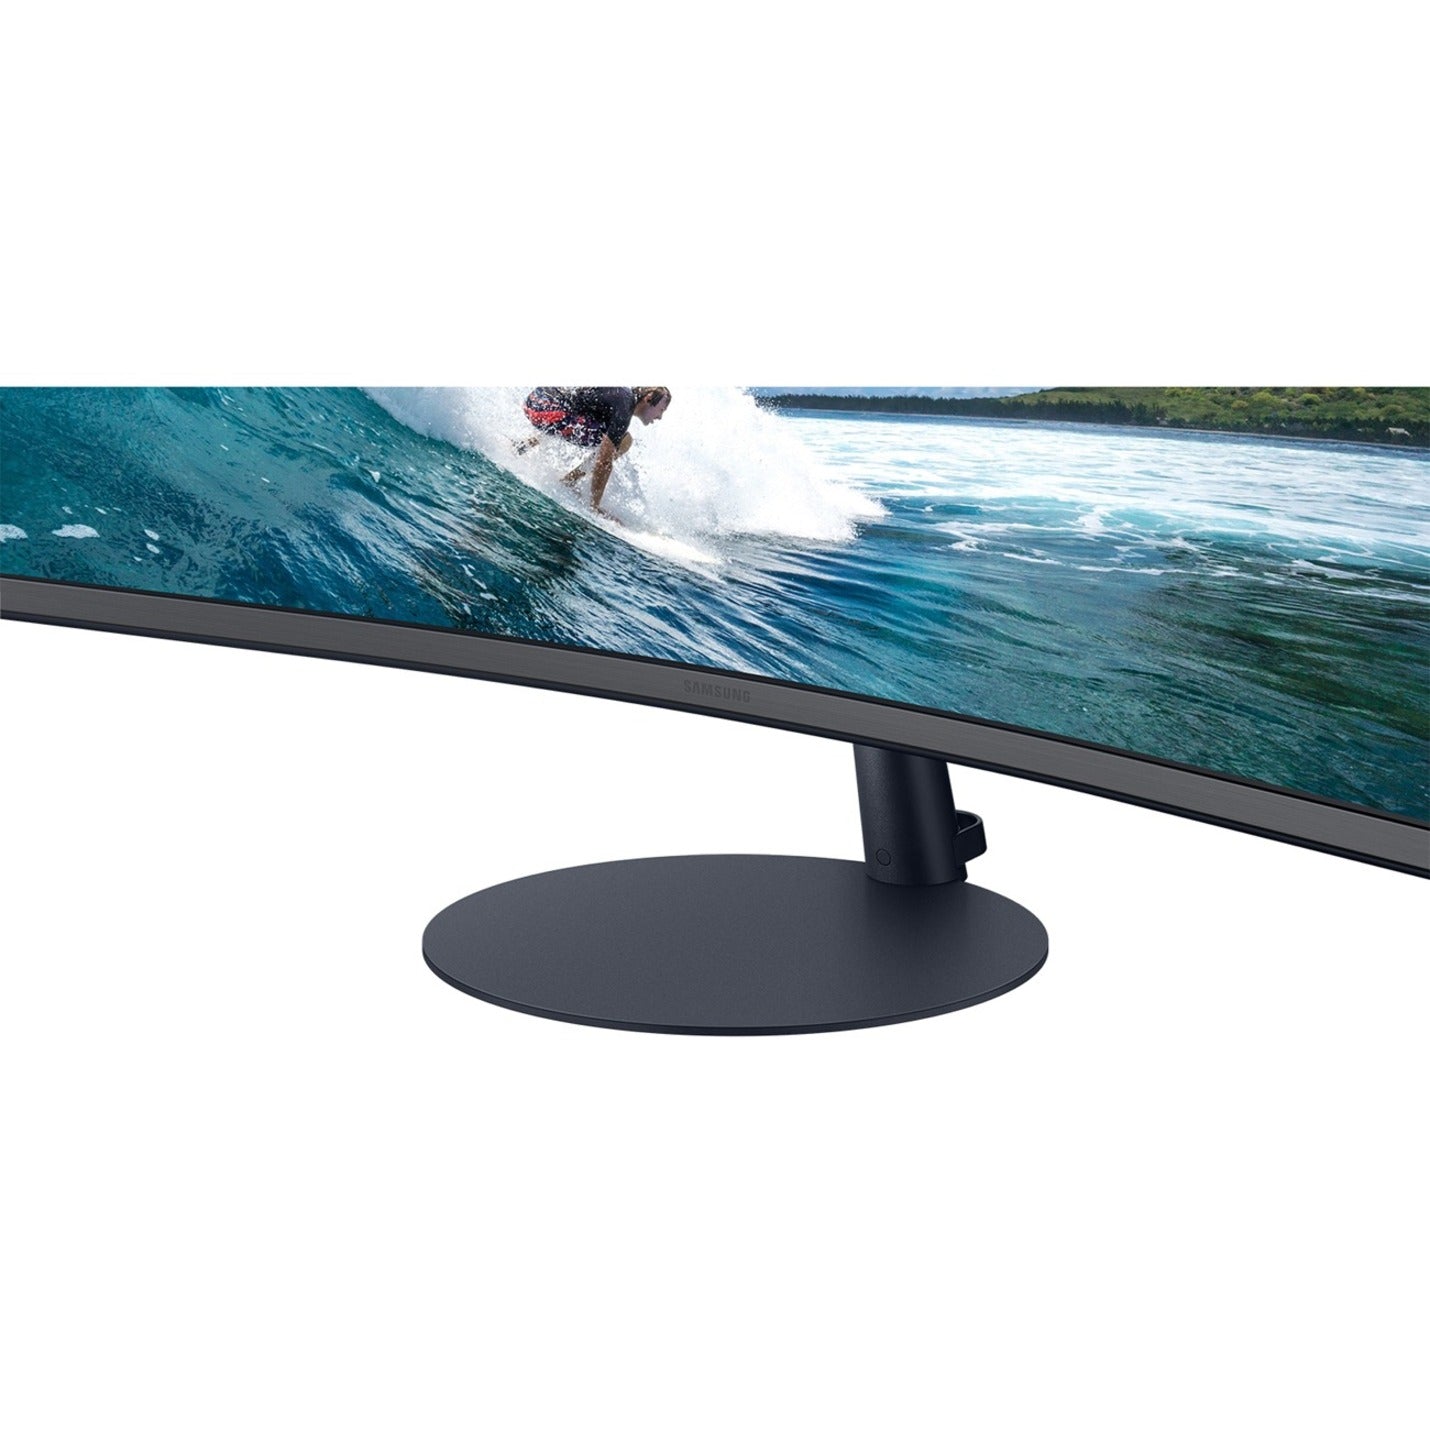 Samsung LC32T550FDNXZA 32" T55 Curved Monitor, Full HD, 75 Hz Refresh Rate, FreeSync